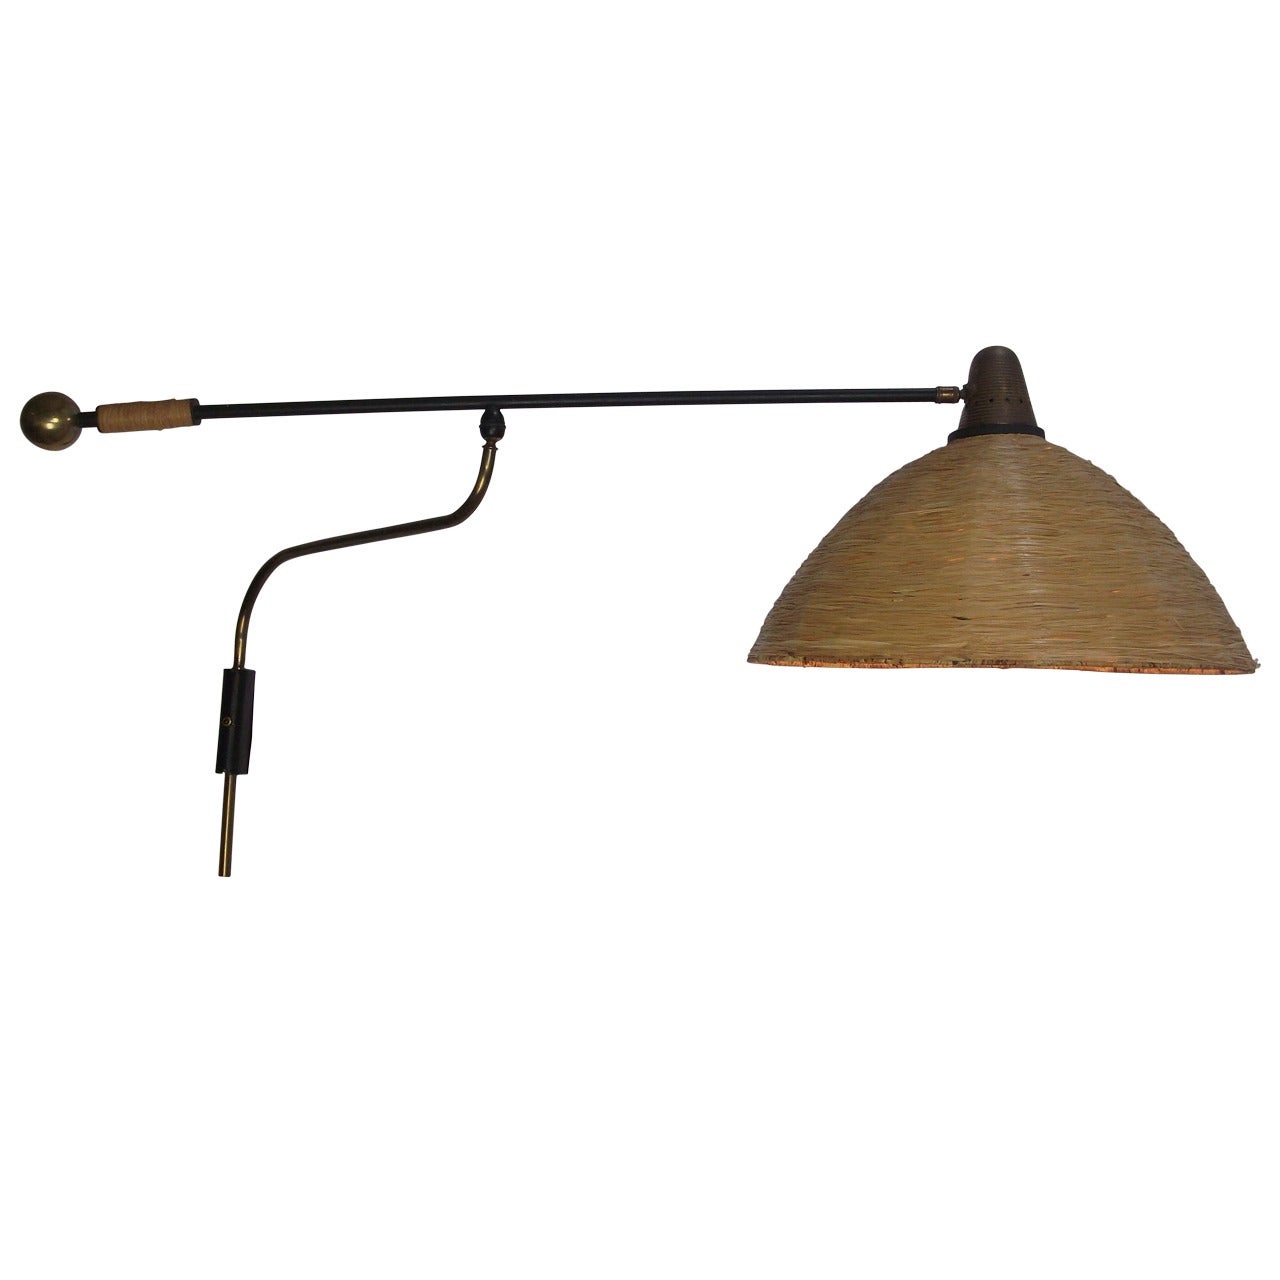 Exceptional Large and Super Rare Mid-Century Modern Adjustable Wall Light